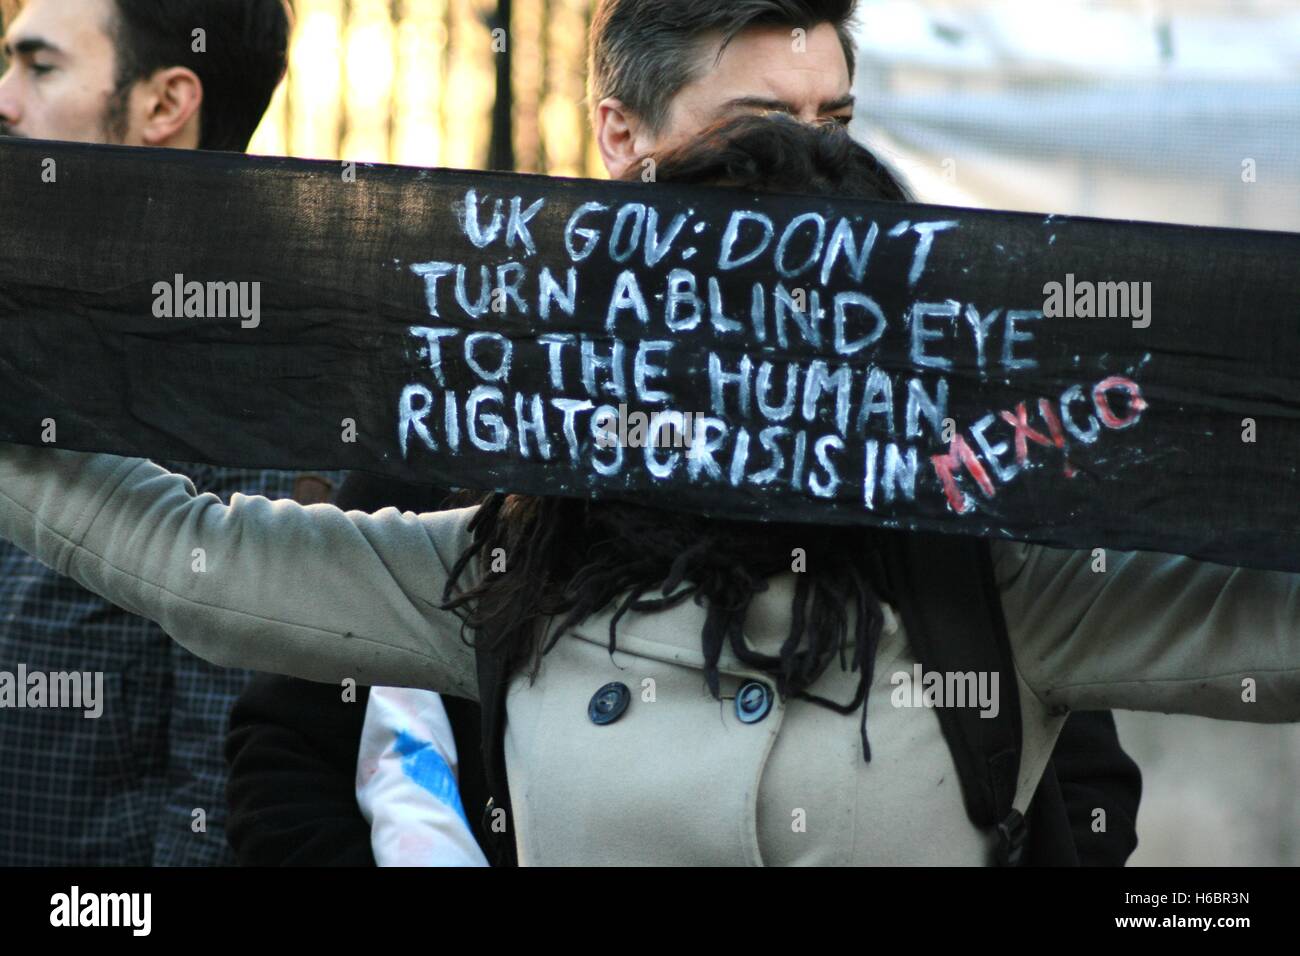 A protester holds a sign that reads 'UK gov: don't turn a blind eye to human rights crisis in Mexico'. Protesters accuse the Mexican police of abducting 43 students of Ayotizinapa and killing 6, and want to raise attention to this during the state visit of Mexican President Peña Nieto to the UK. Stock Photo